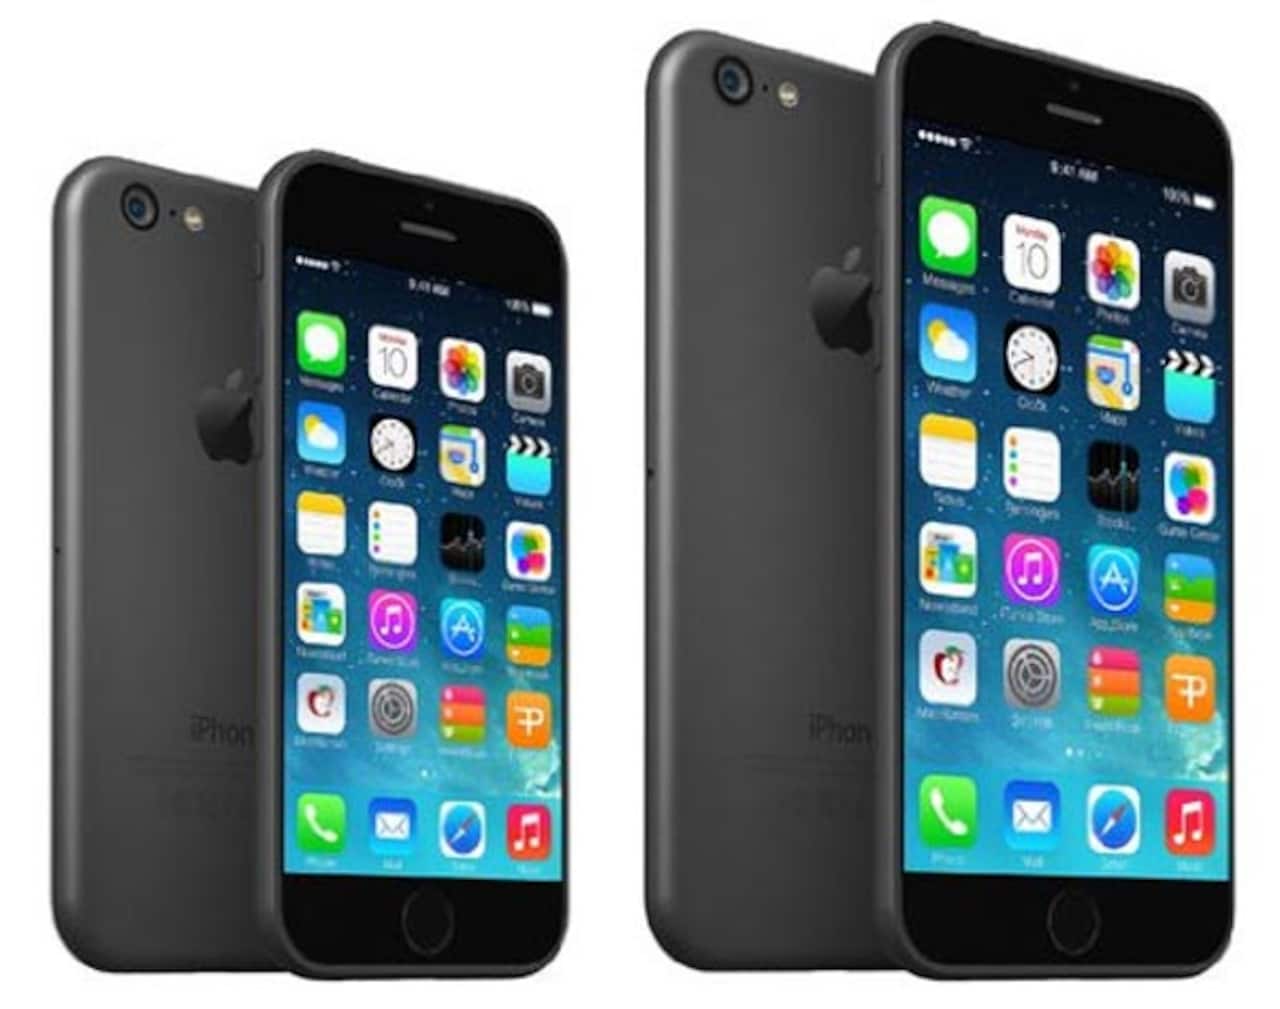 Find Out Which Celebs Are Excited For The Iphone 6 Launch Bollywood News And Gossip Movie